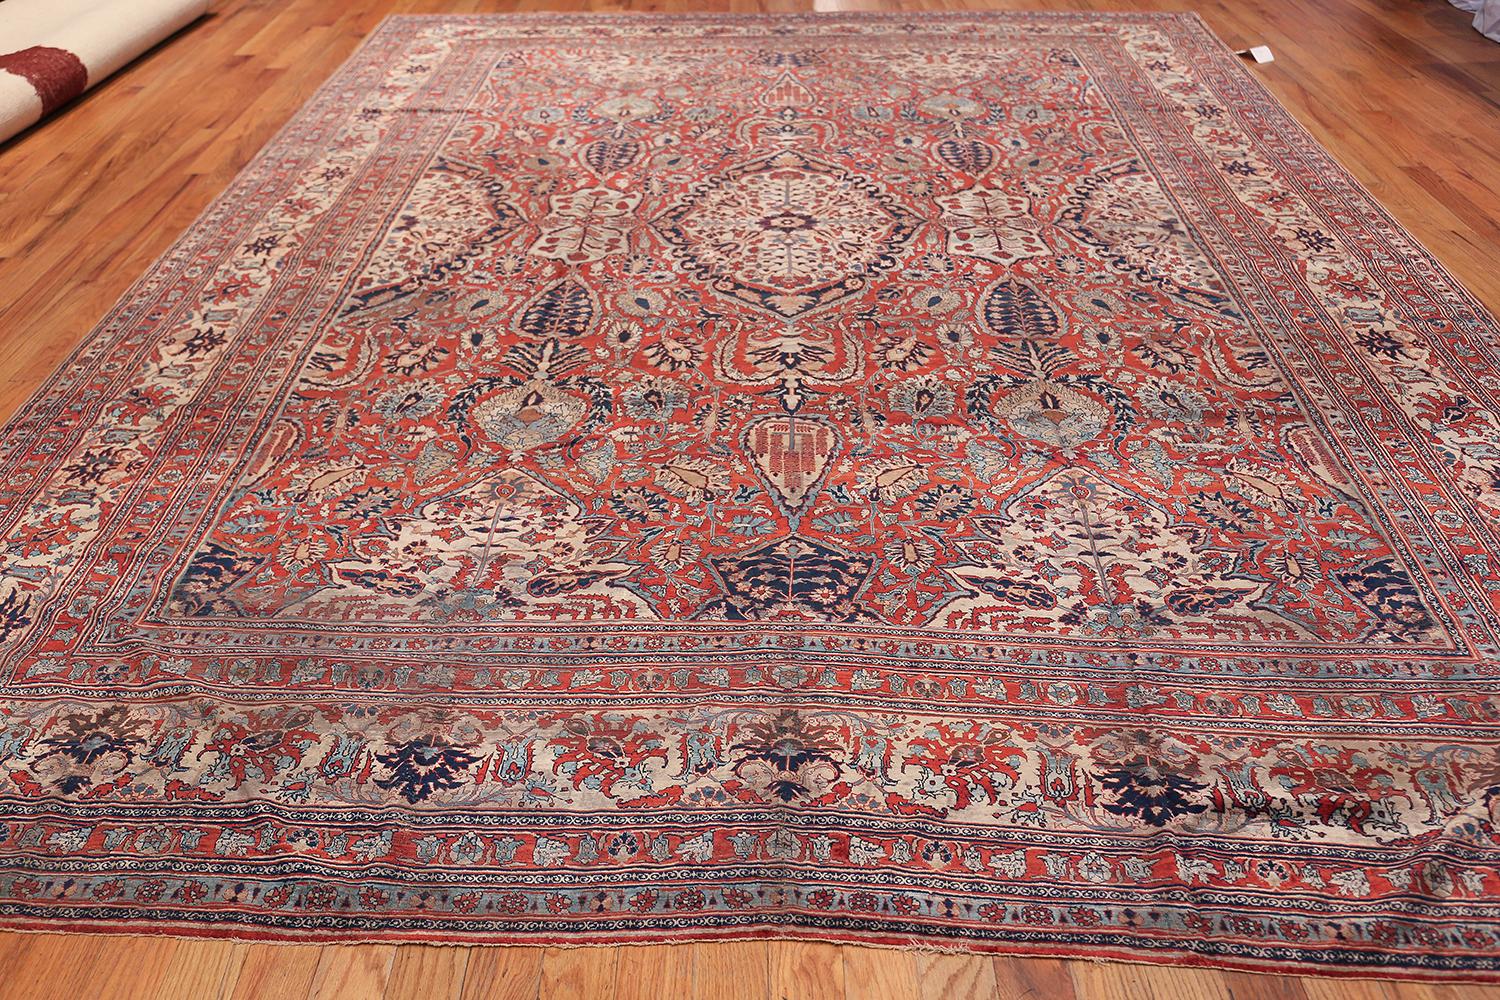 Antique Persian silk Heriz carpet, country of origin: Persia, date: circa late 19th century. Size: 10 ft x 13 ft (3.05 m x 3.96 m)

Here is a striking antique Oriental rug, an antique Heriz rug, woven with silk threads by the celebrated rug makers